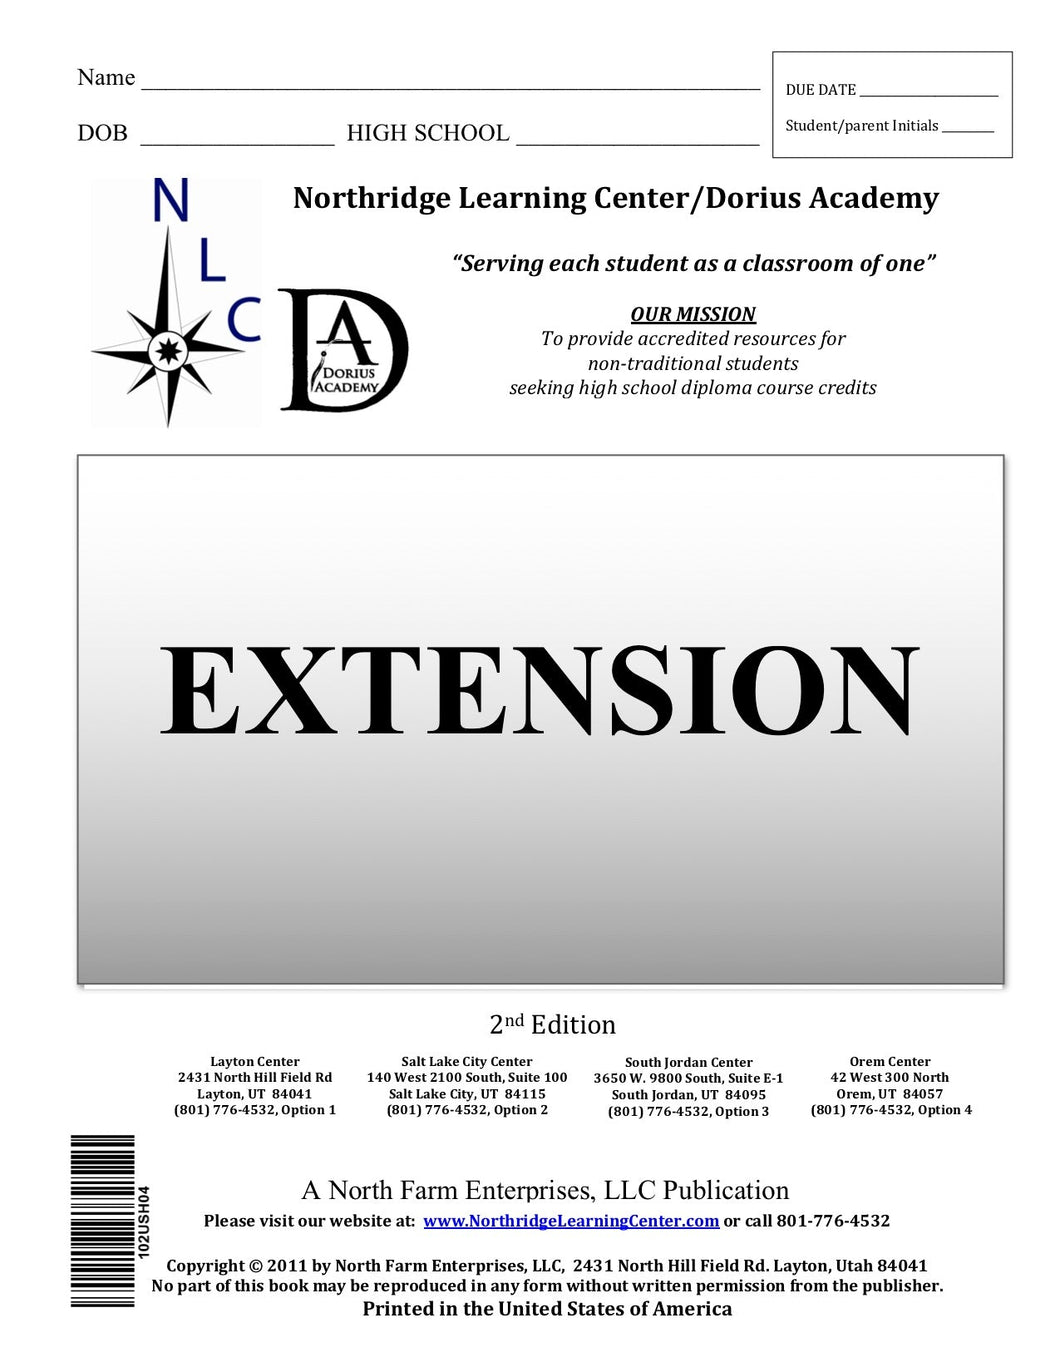 CC Math, Secondary 2, Section IV - Extension